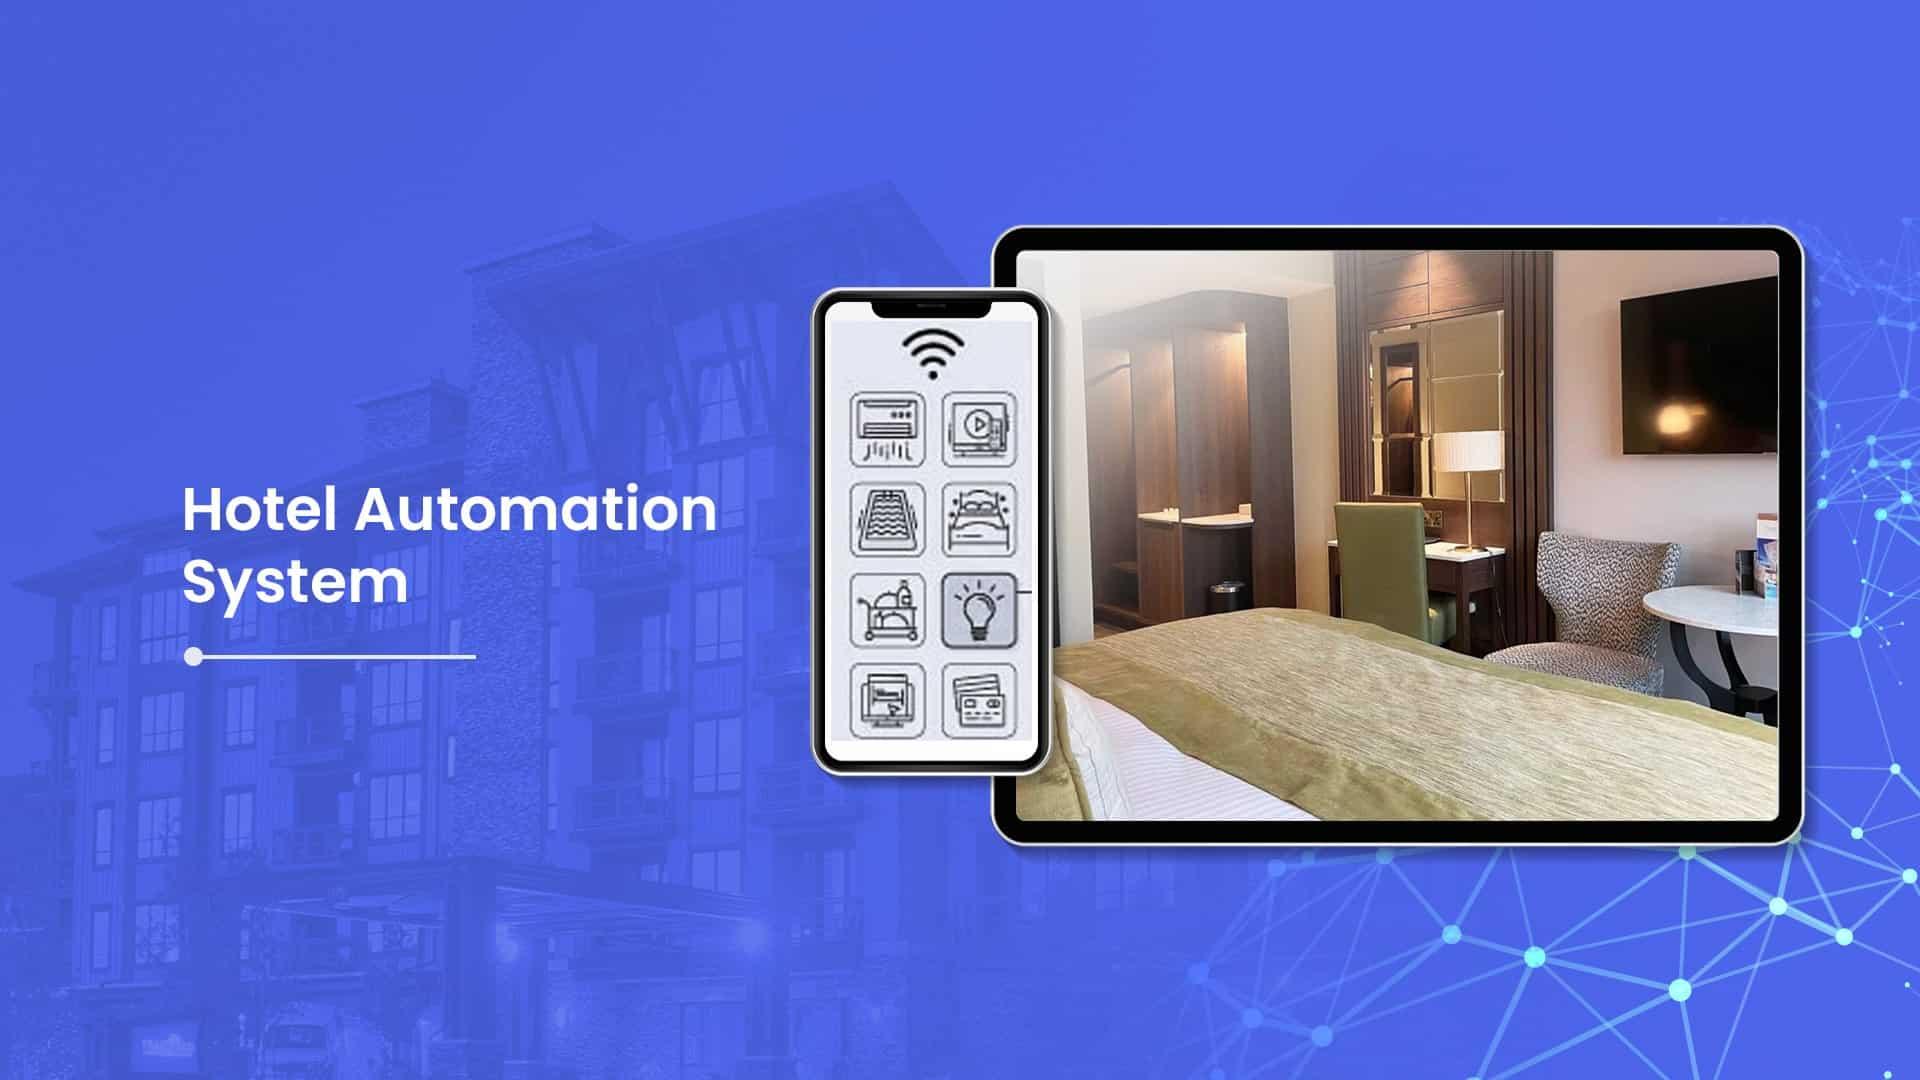 Hotel Automation System